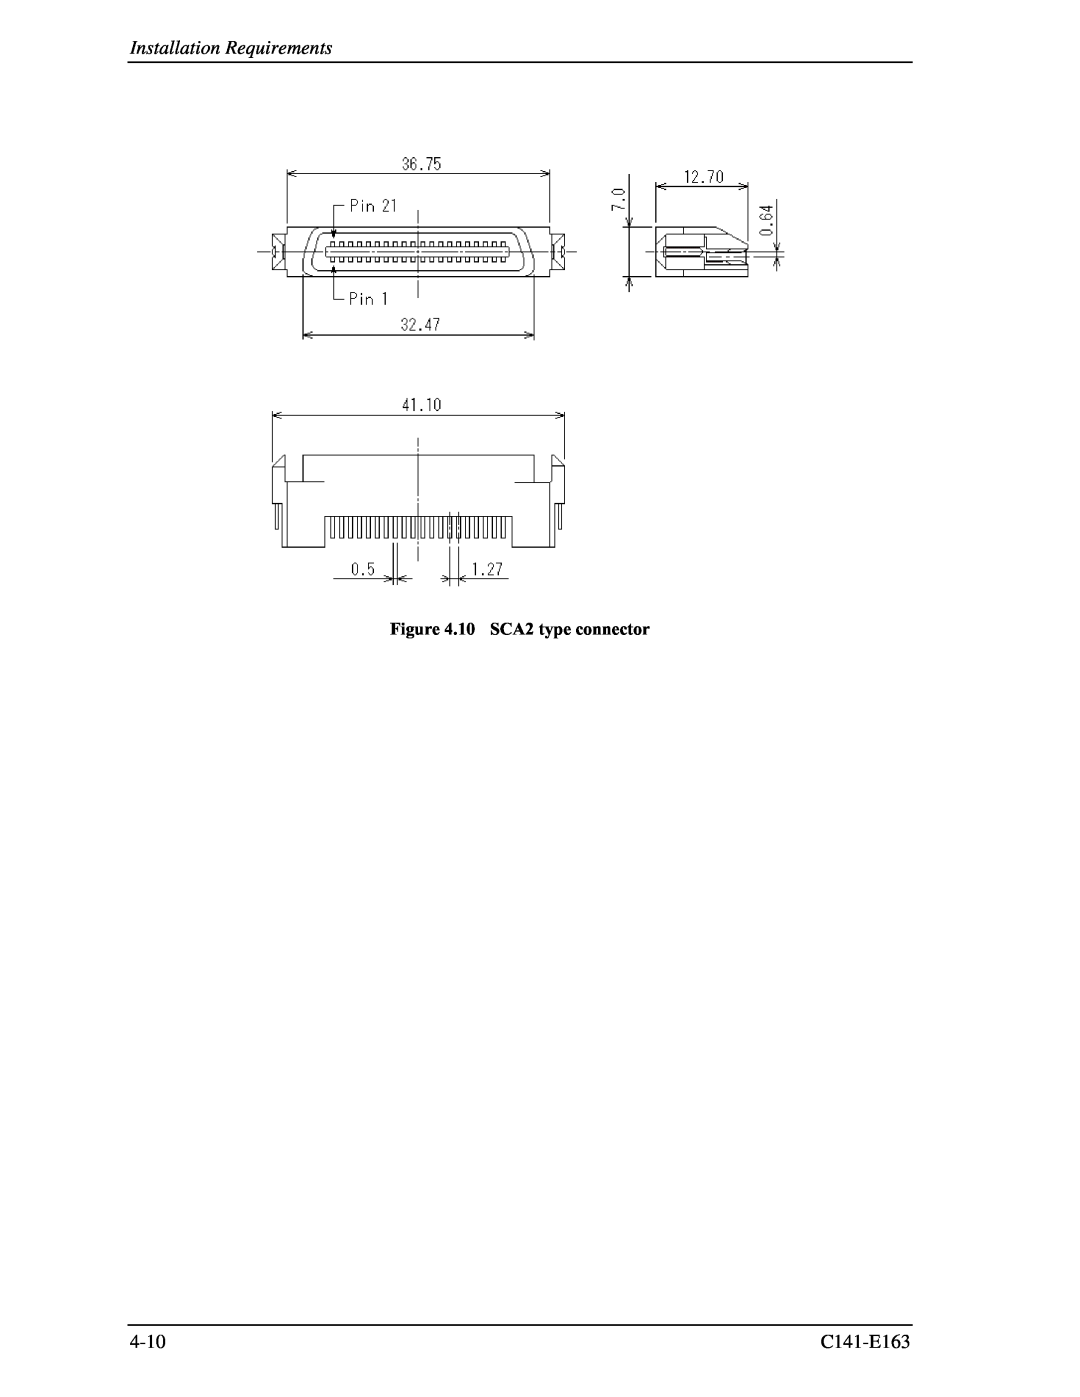 Fujitsu MAP3147FC, MAP3735FC manual Installation Requirements, 4-10, C141-E163, 10 SCA2 type connector 